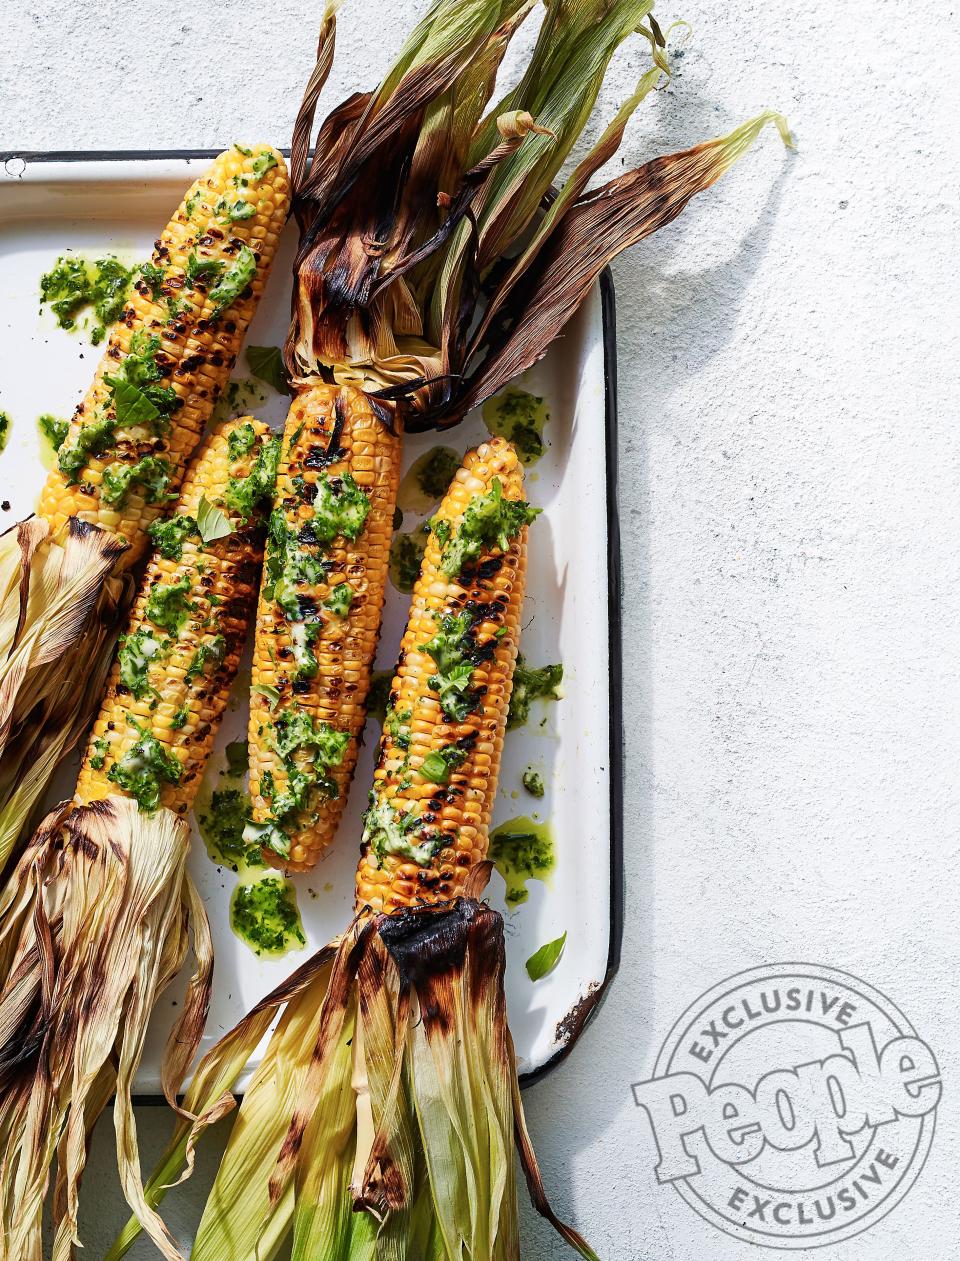 AMY & MIKE MILLS' GRILLED CORN WITH GARLIC HERB BUTTER